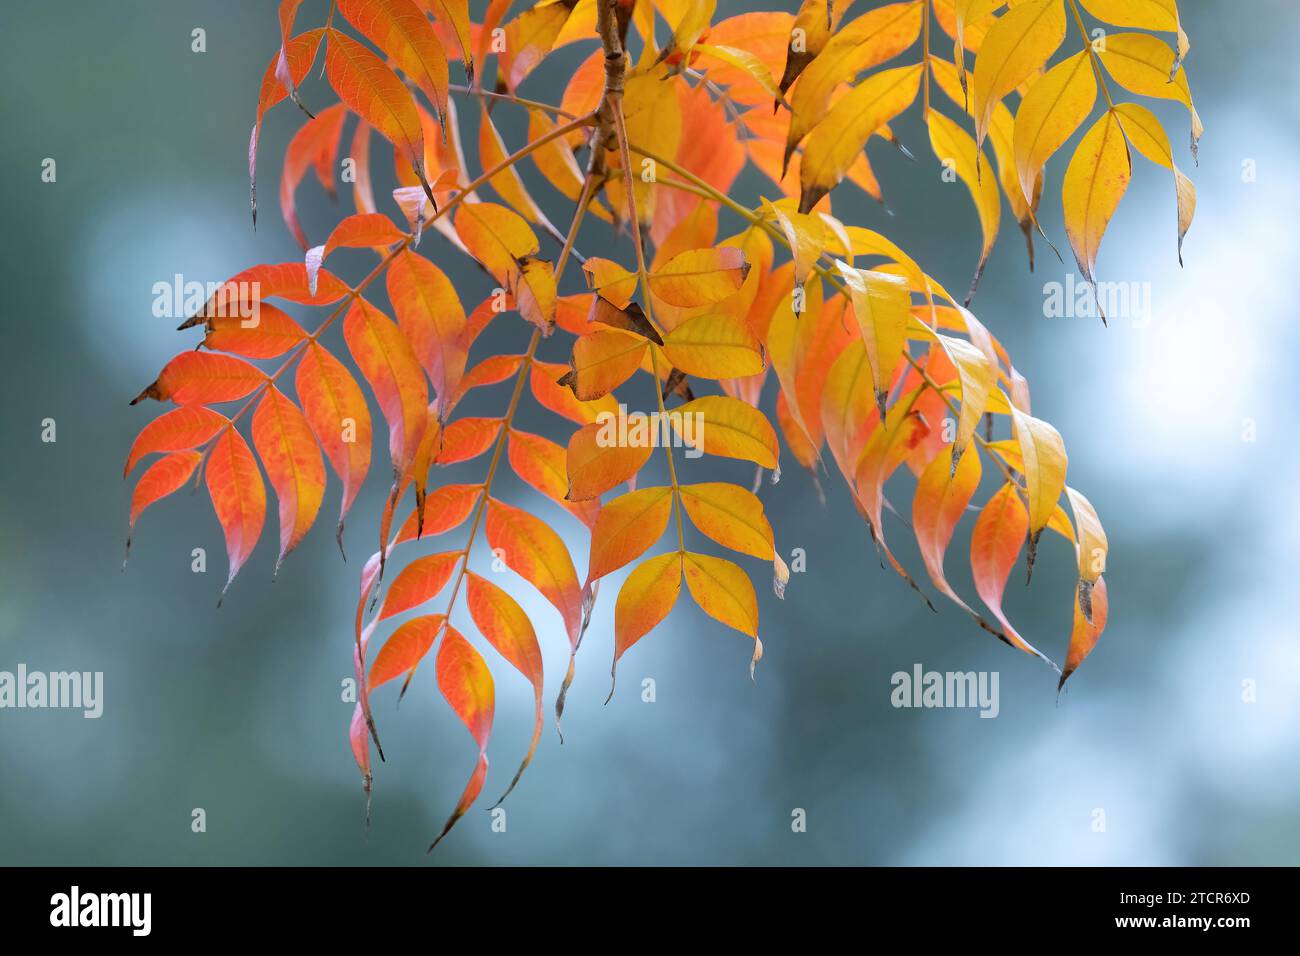 Yellow and Orange Hues of Autumn Leaves Stock Photo